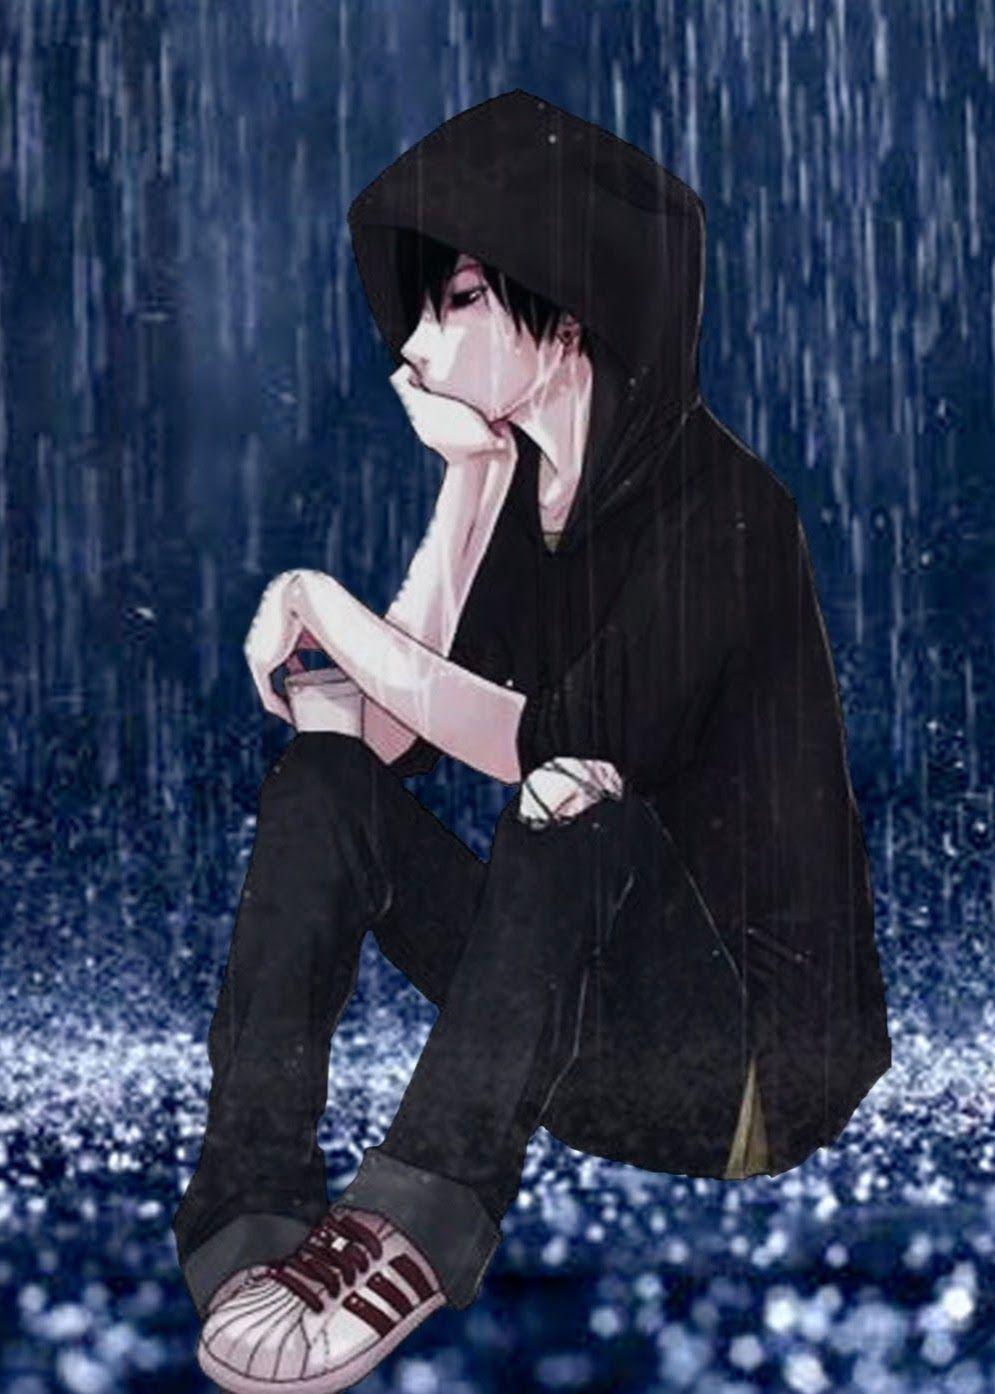 Image result for sad anime boy crying in the rain alone. Anime